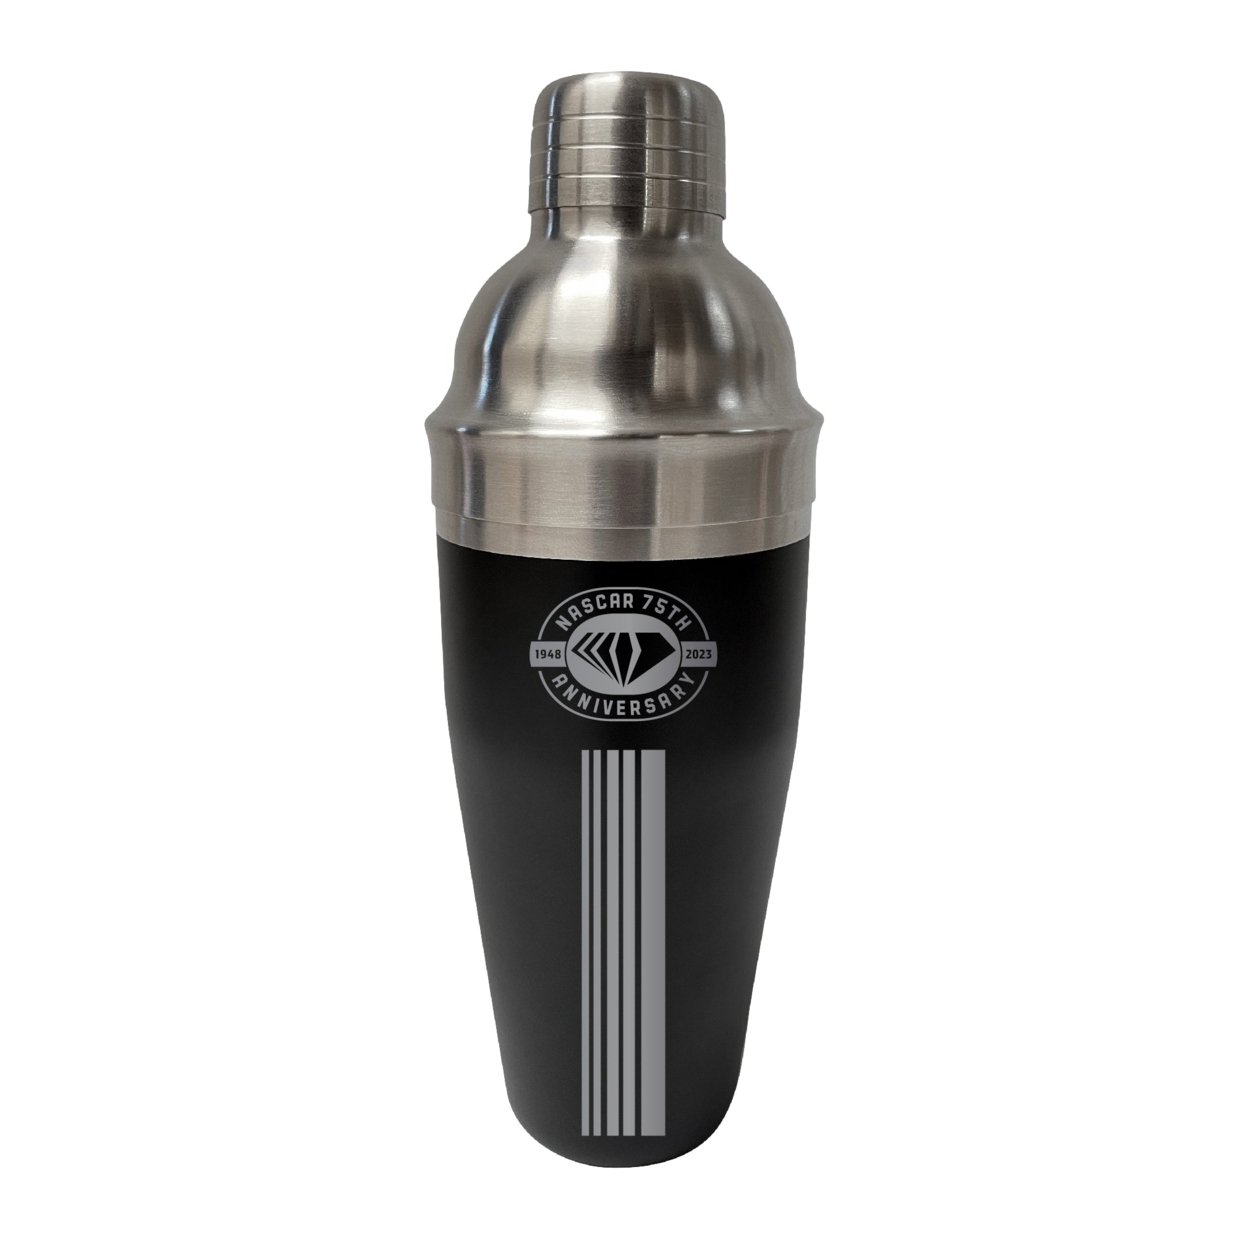 NASCAR 75 Year Anniversary Officially Licensed Cocktail Shaker